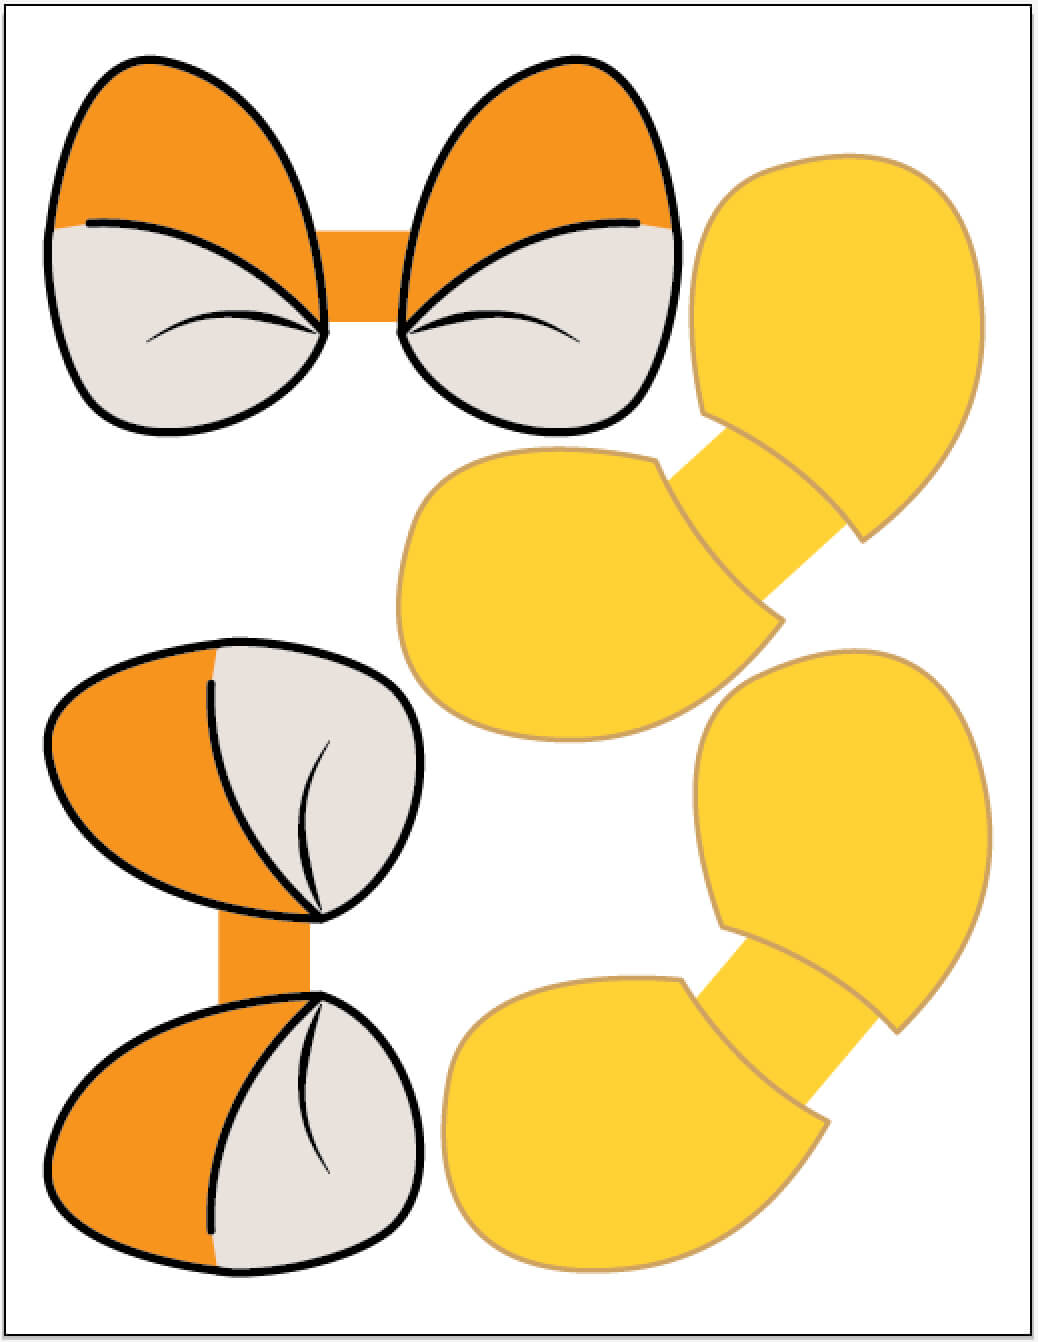 Printable Winnie the Pooh and Tigger ears for DIY Winnie the Pooh headbands